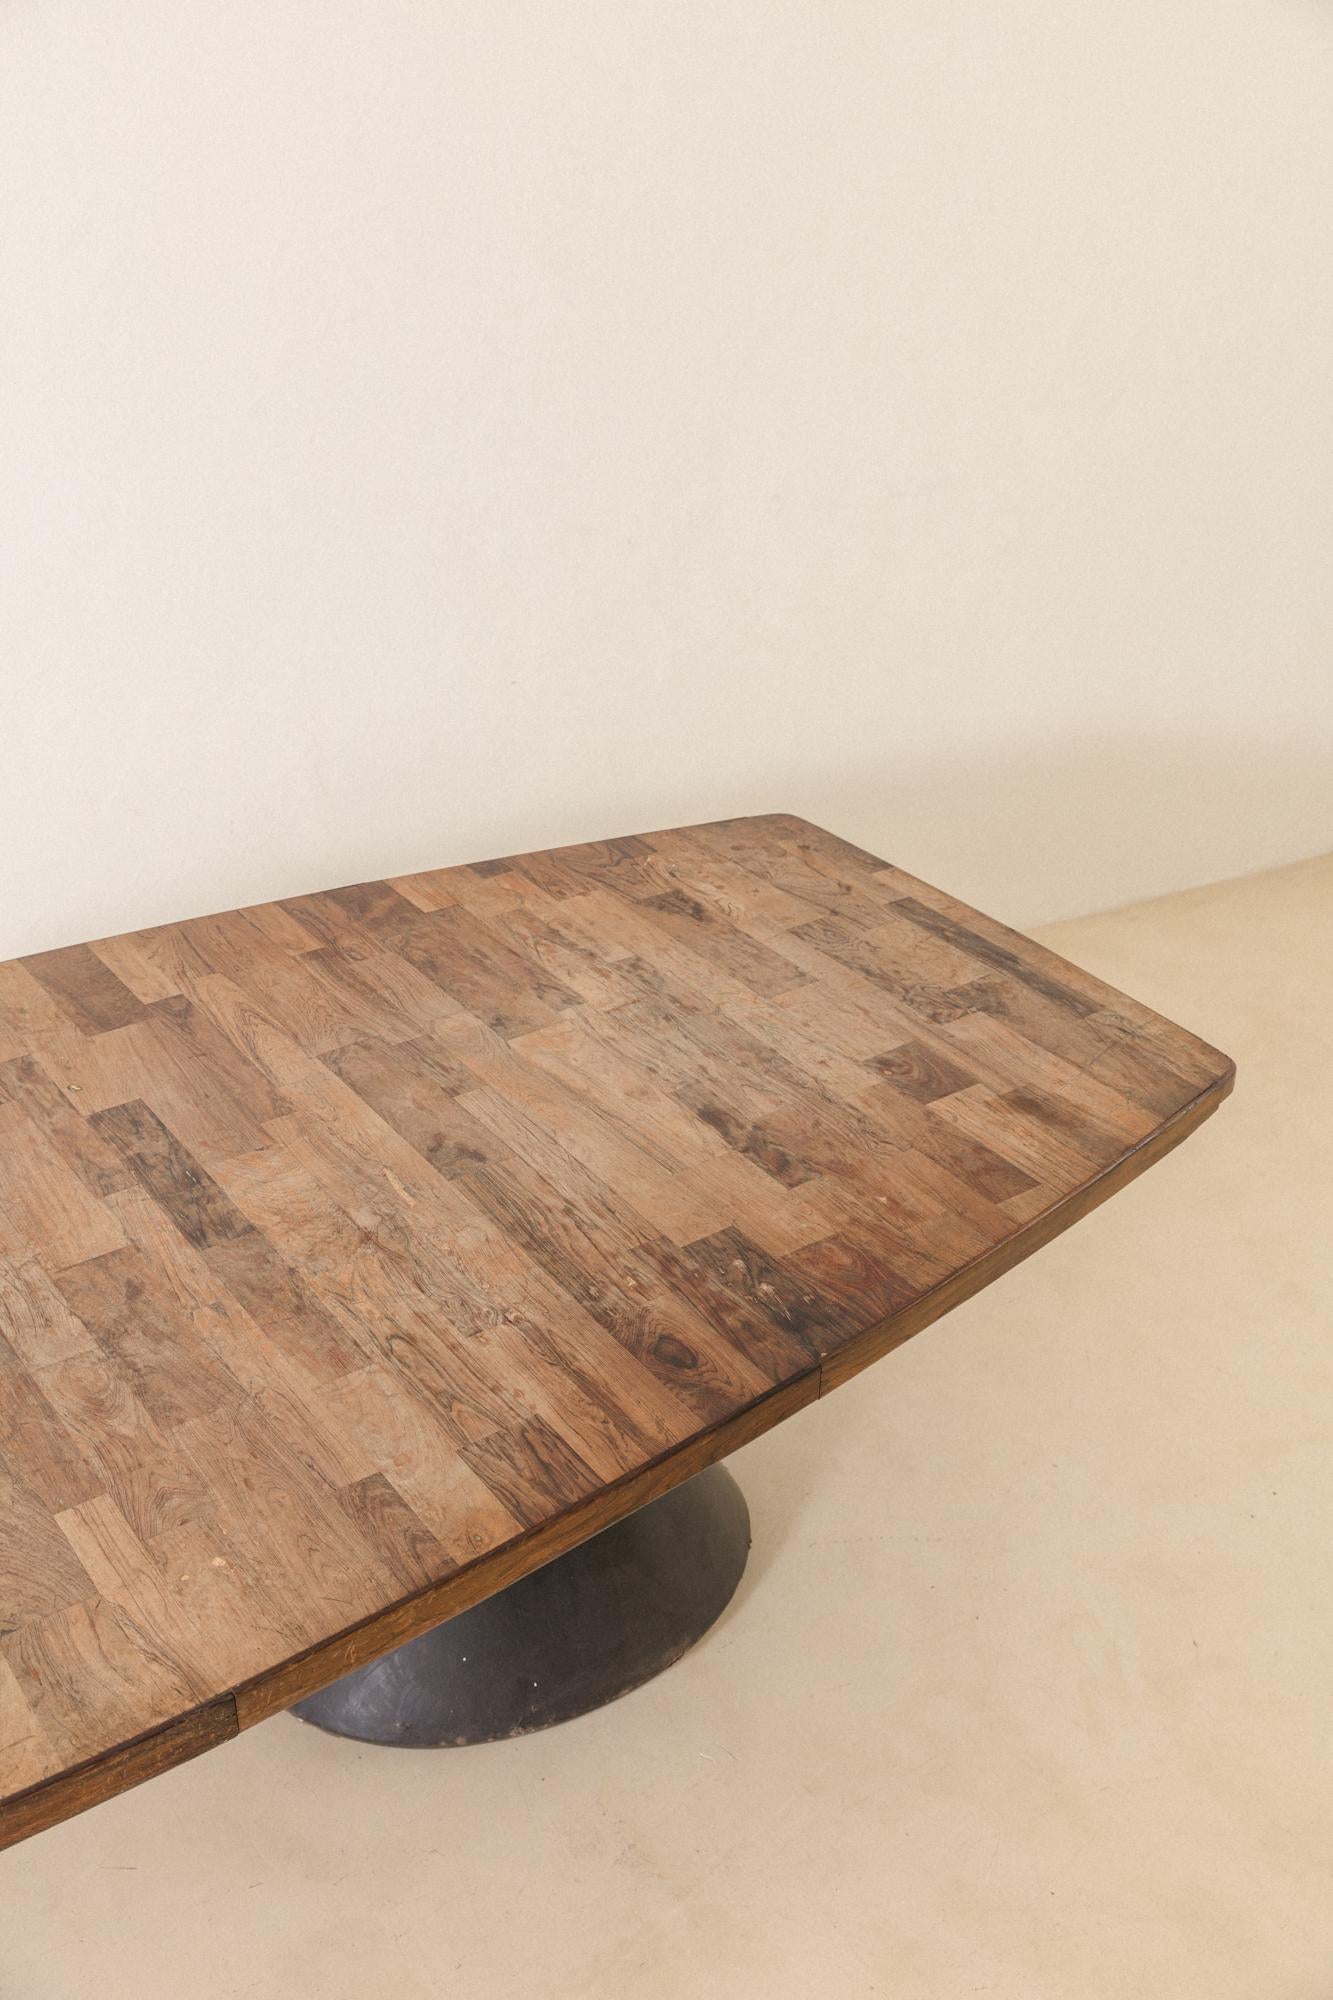 Mid-20th Century Jorge Zalszupin Guanabara Rosewood Vintage Dining Table, 1959, Brazilian Design For Sale